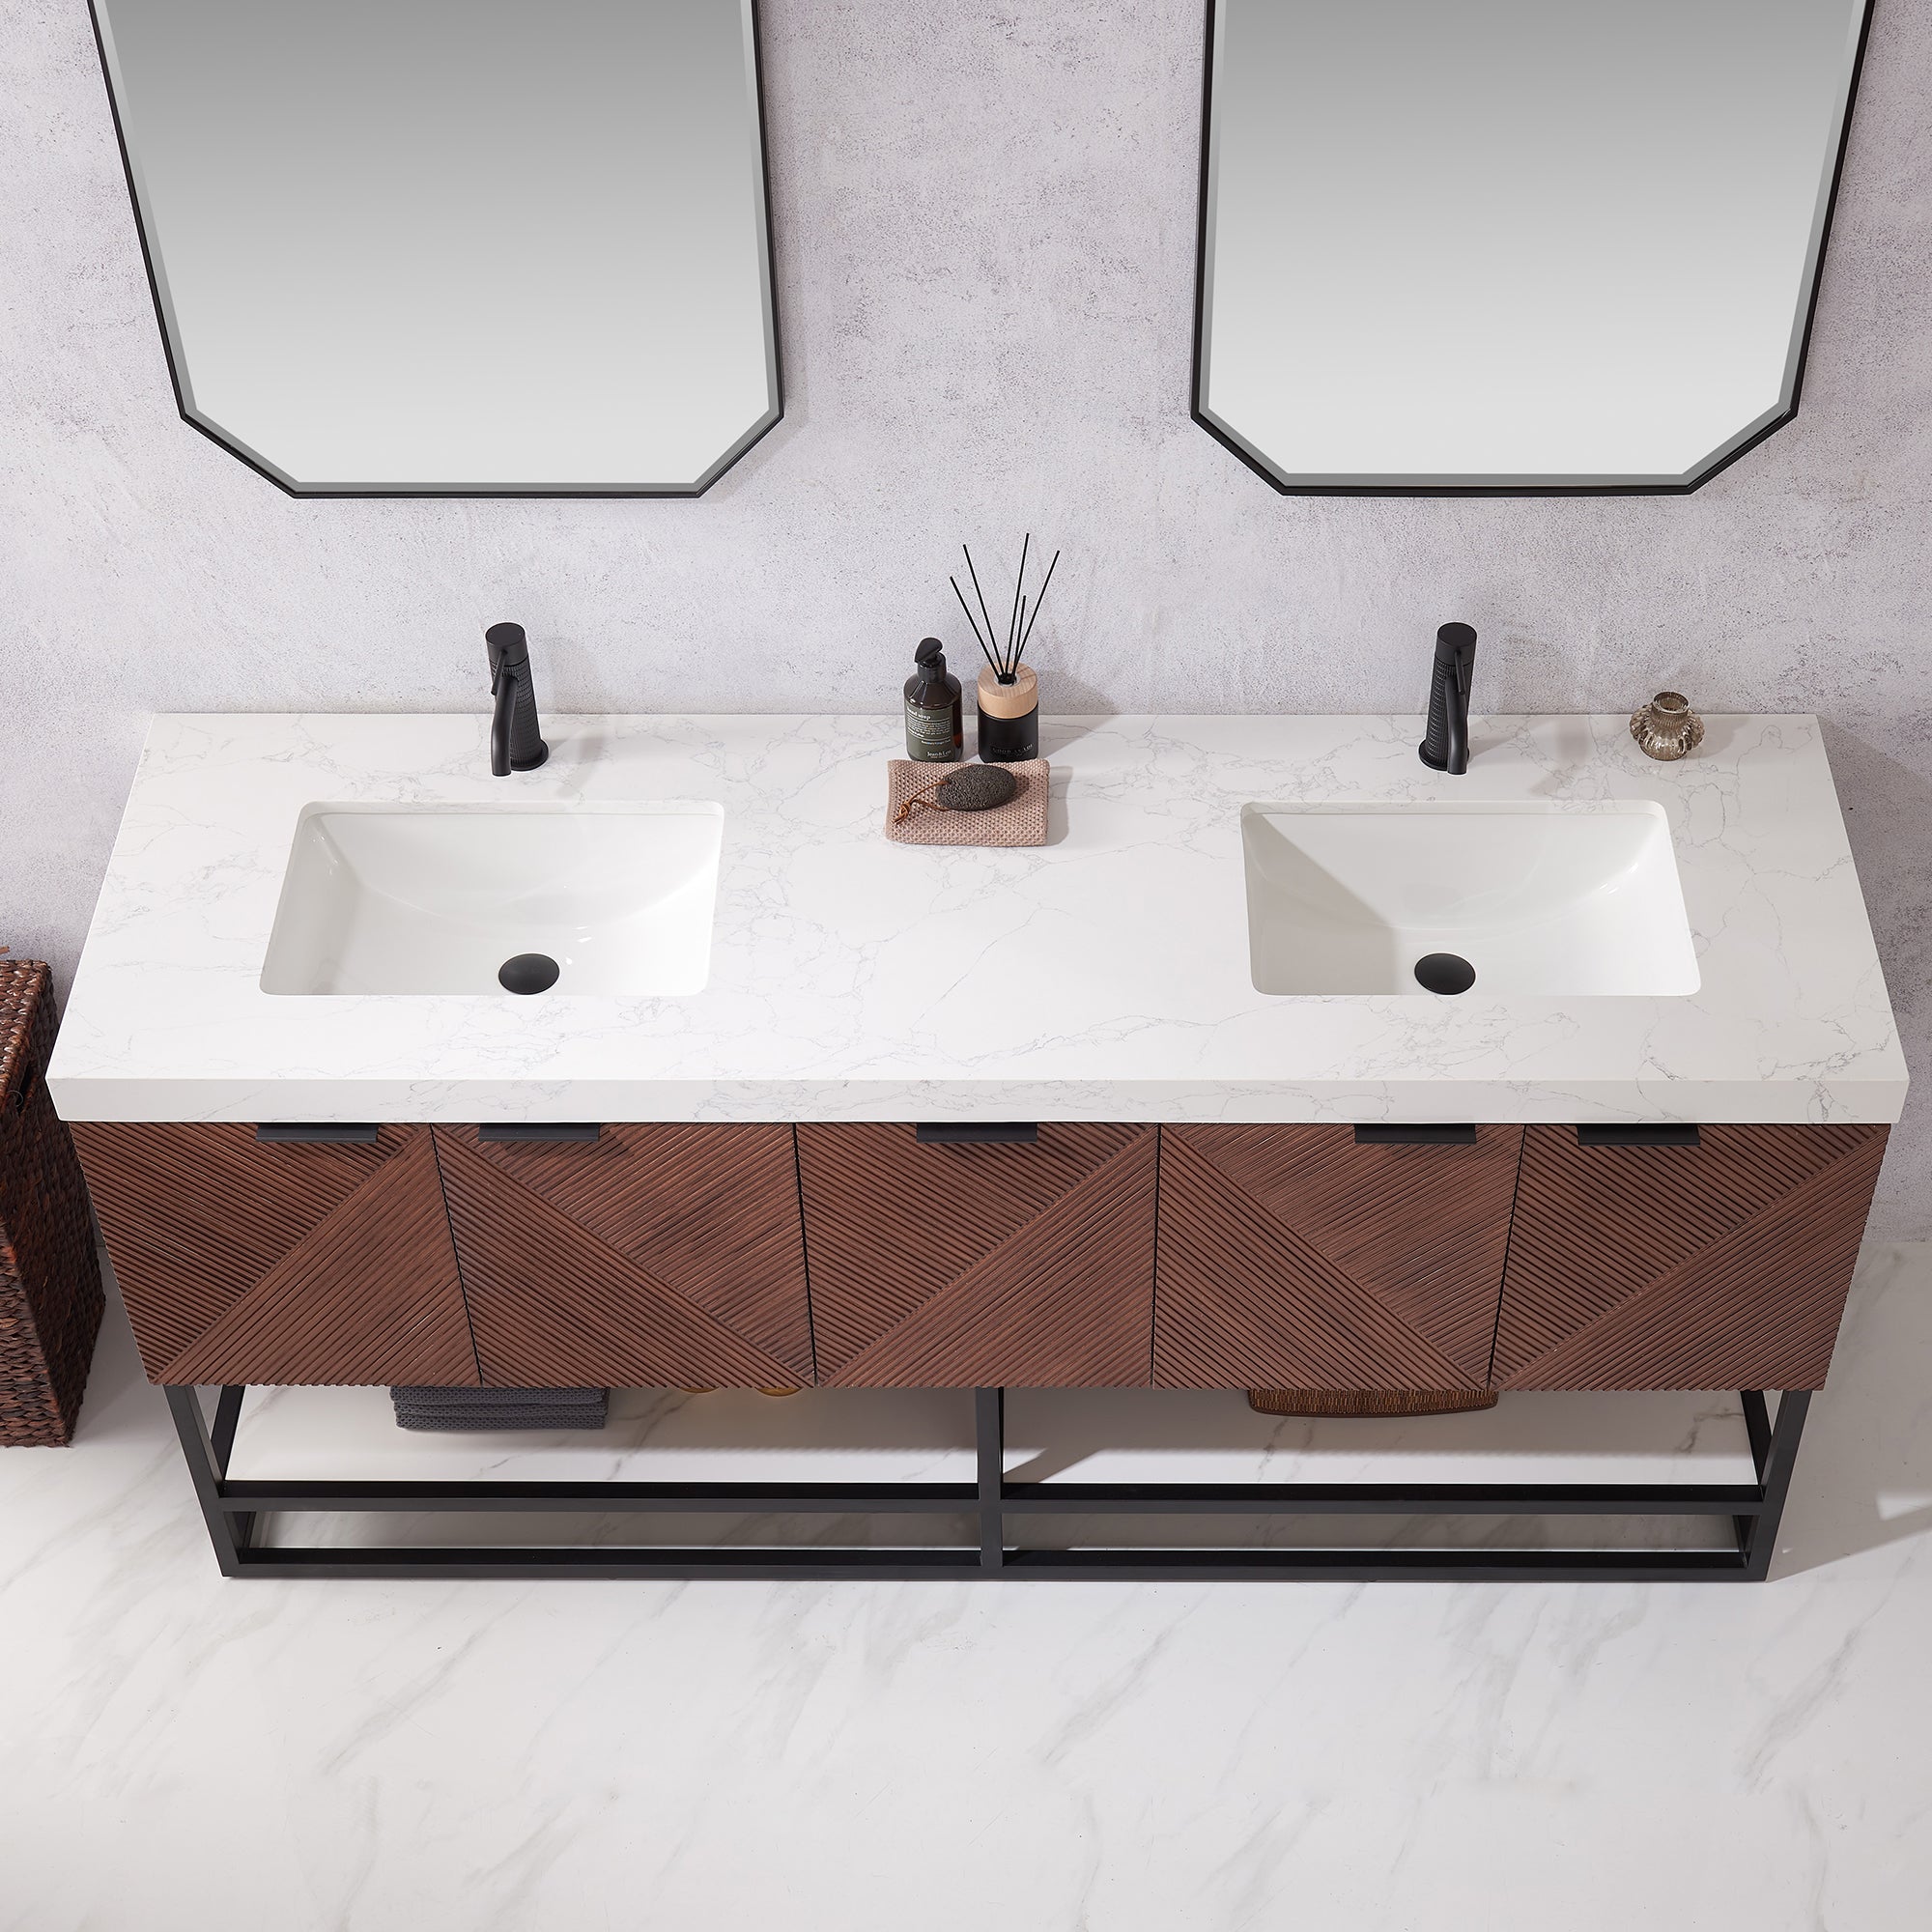 Mahon 72B" Free-standing Double Bath Vanity in North American Deep Walnut with White Grain Composite Stone Top